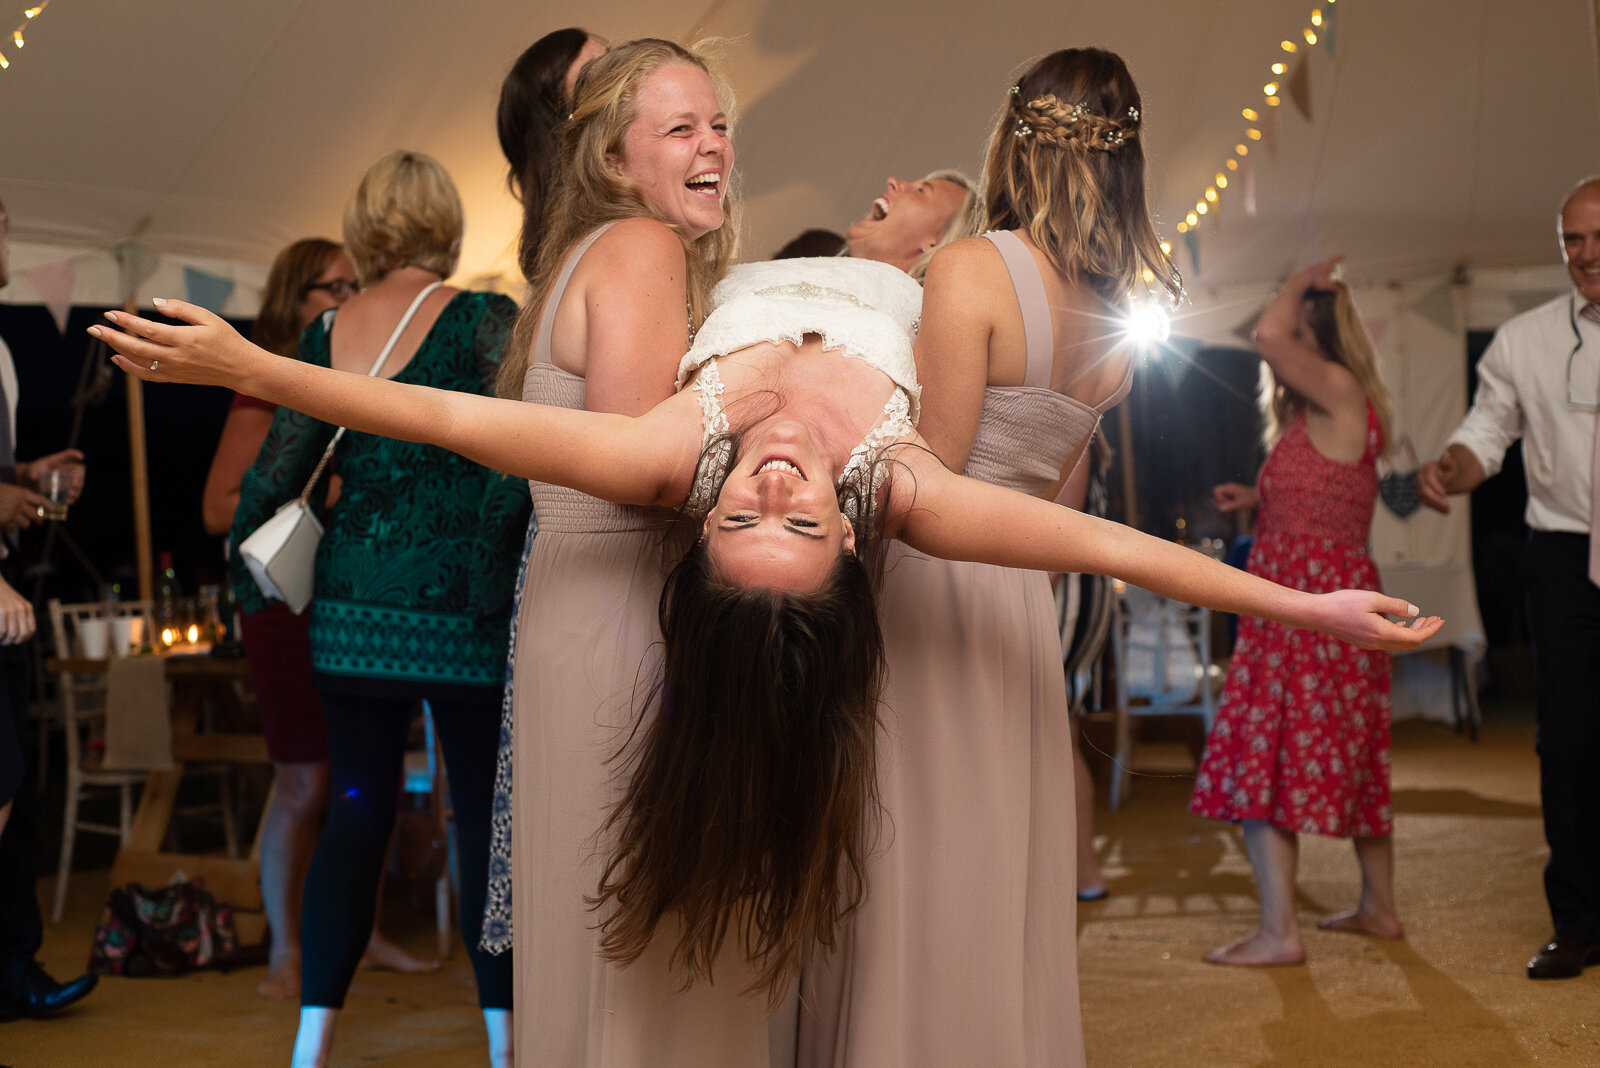 Bride+being+carried+by+friends+on+the+dancefloor+at+festival+style+wedding+in+cornwall.jpeg